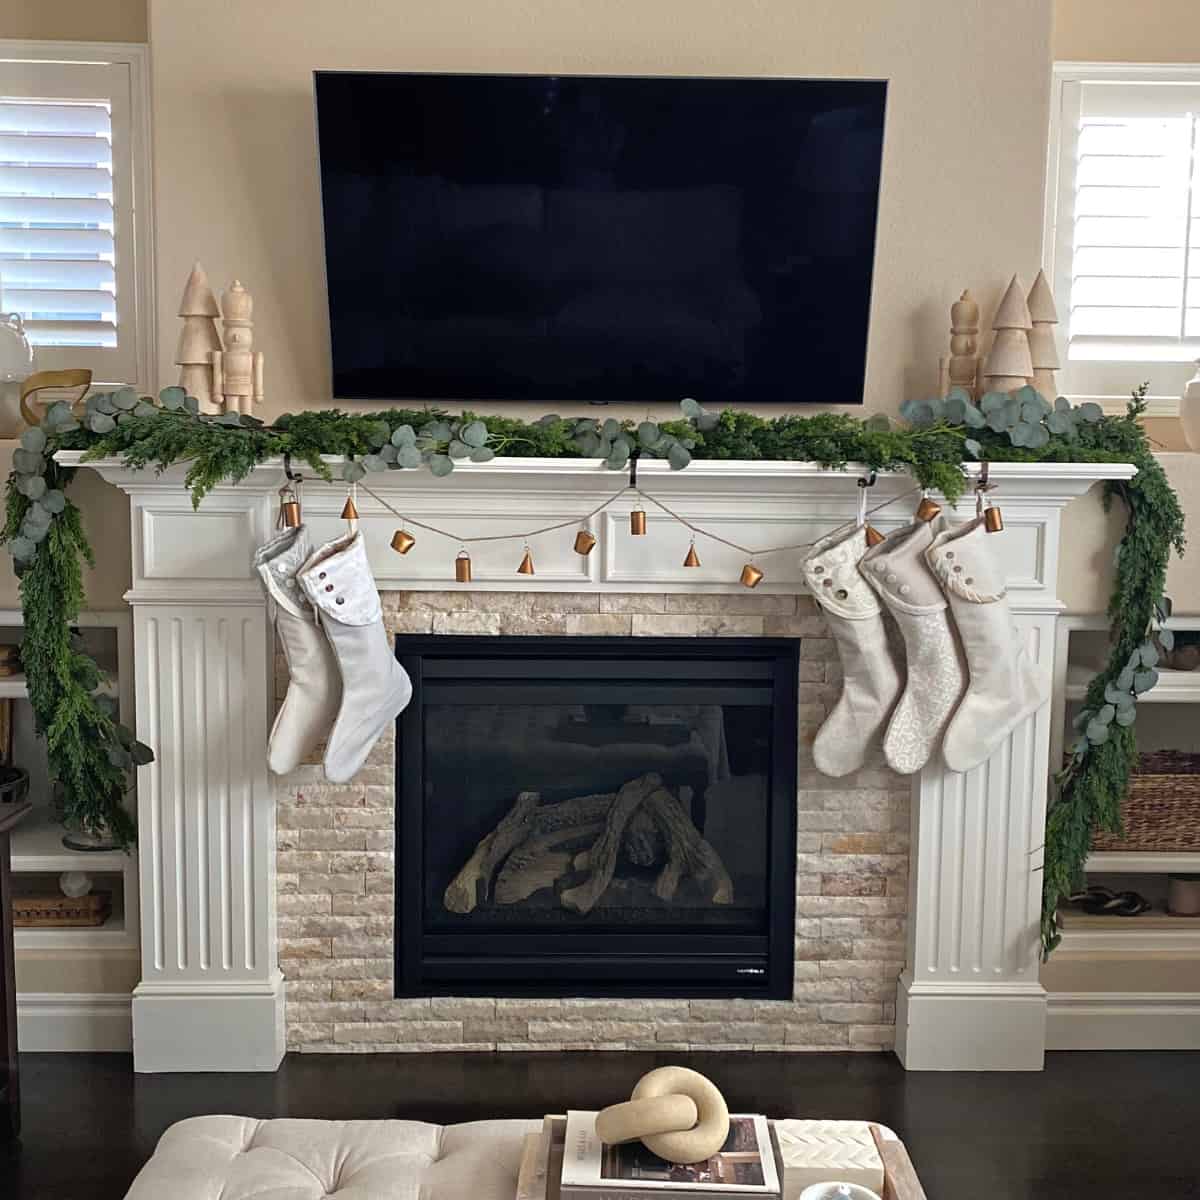 Fireplace mantel decorated with holiday garland, stockings and metal bells